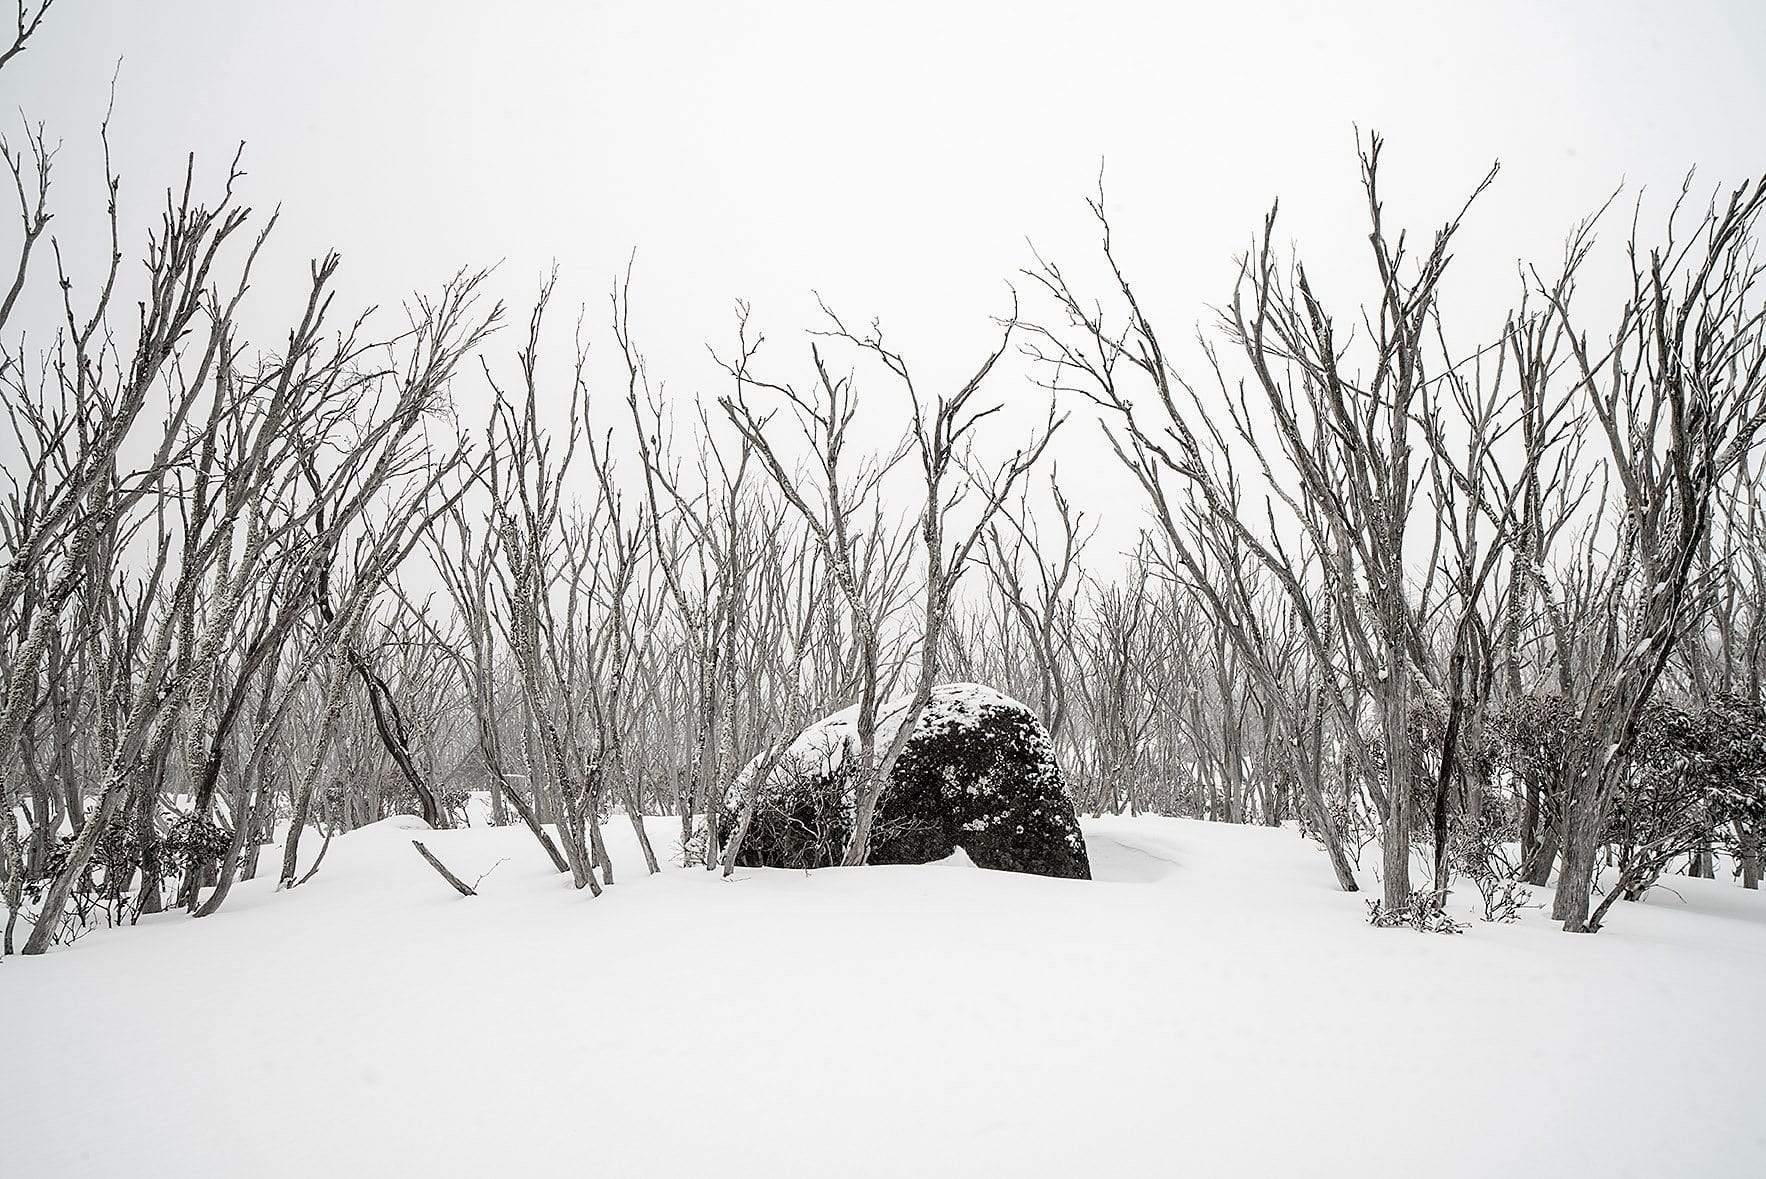 A lot of empty tree stems and a stone, on a snow-covered area, Lone Boulder - Snowy Mountains NSW 